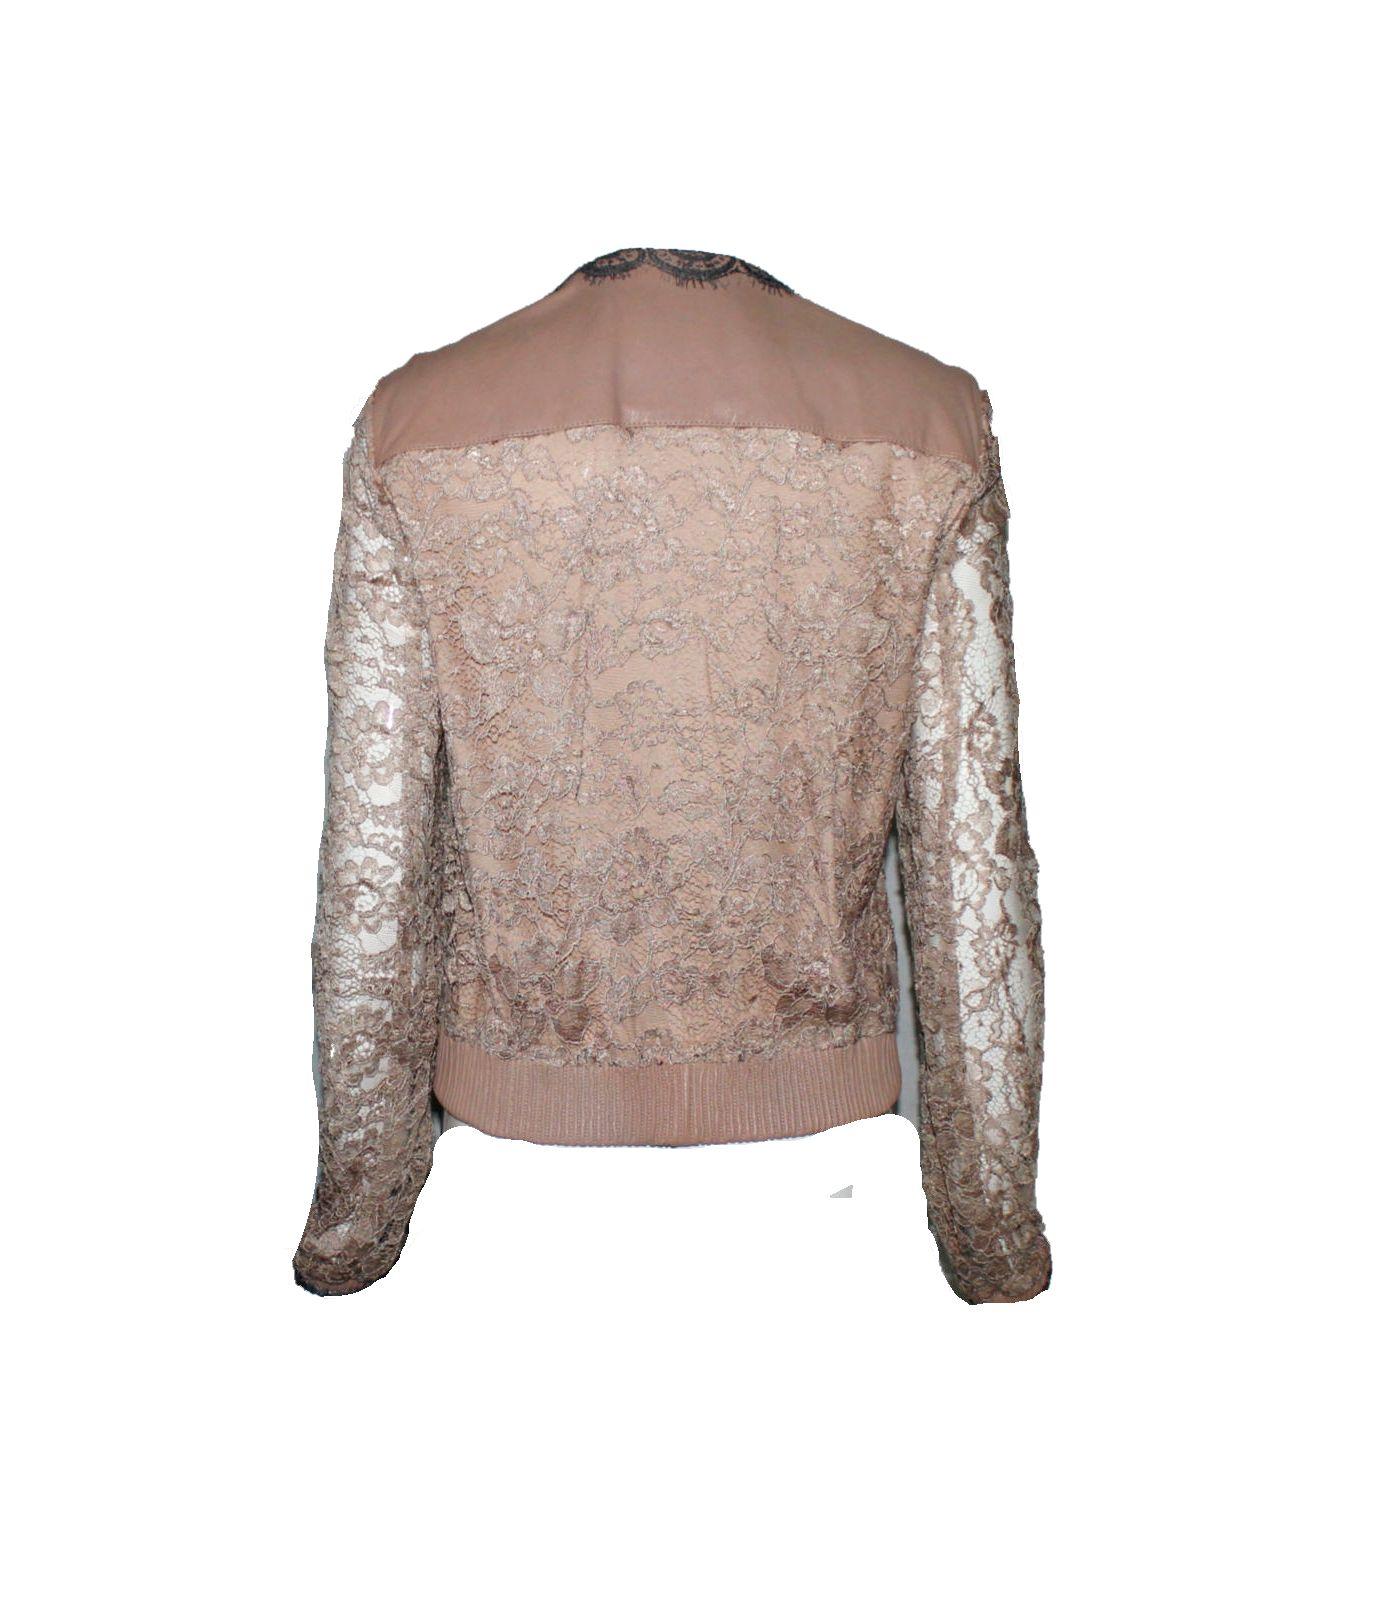 Stunning Dolce & Gabbana Jacket
Finest lambskin leather
Nude & Grey lace
Partially lined
Decorative big jewelry buttons 
Two side pockets with zipper engraved with 